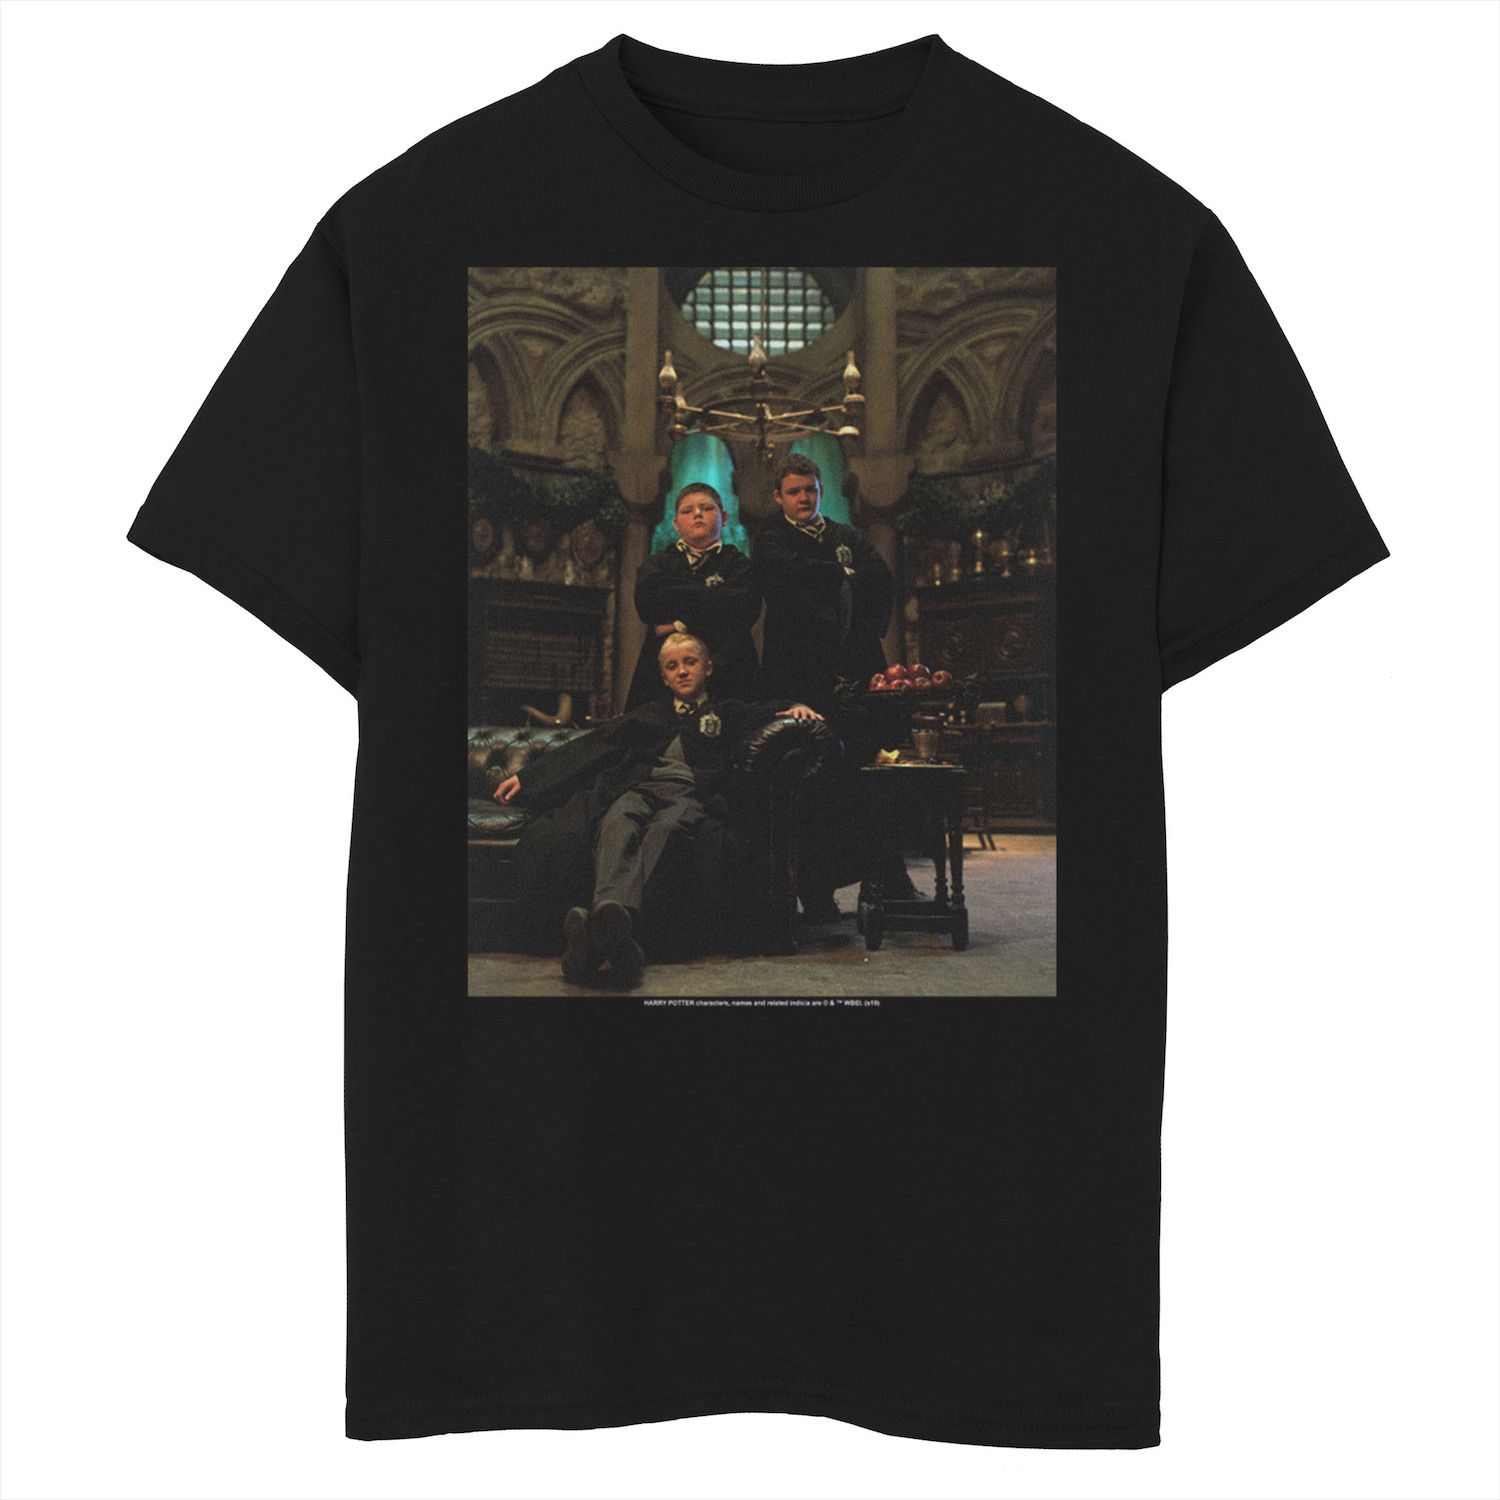 Image for Harry Potter Boys 8-20 Draco Crabbe & Goyle Portrait Graphic Tee at Kohl's.